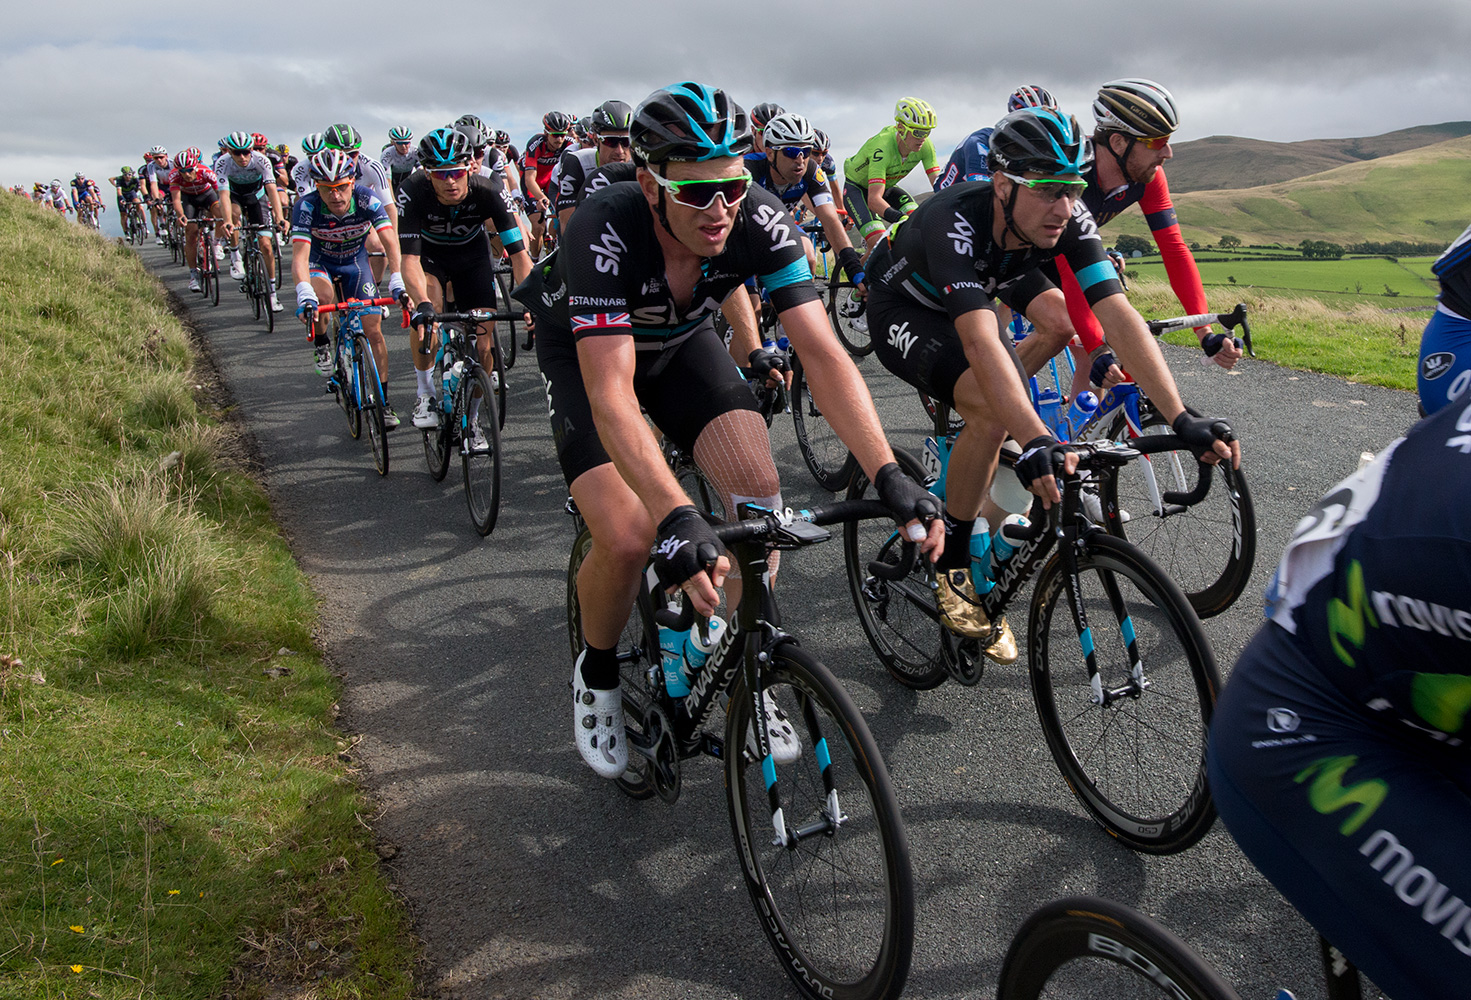 Bradley Wiggins and riders from Teak Sky in the peleton as it crosses Caldbeck Commons in Cumbria during Stage 2